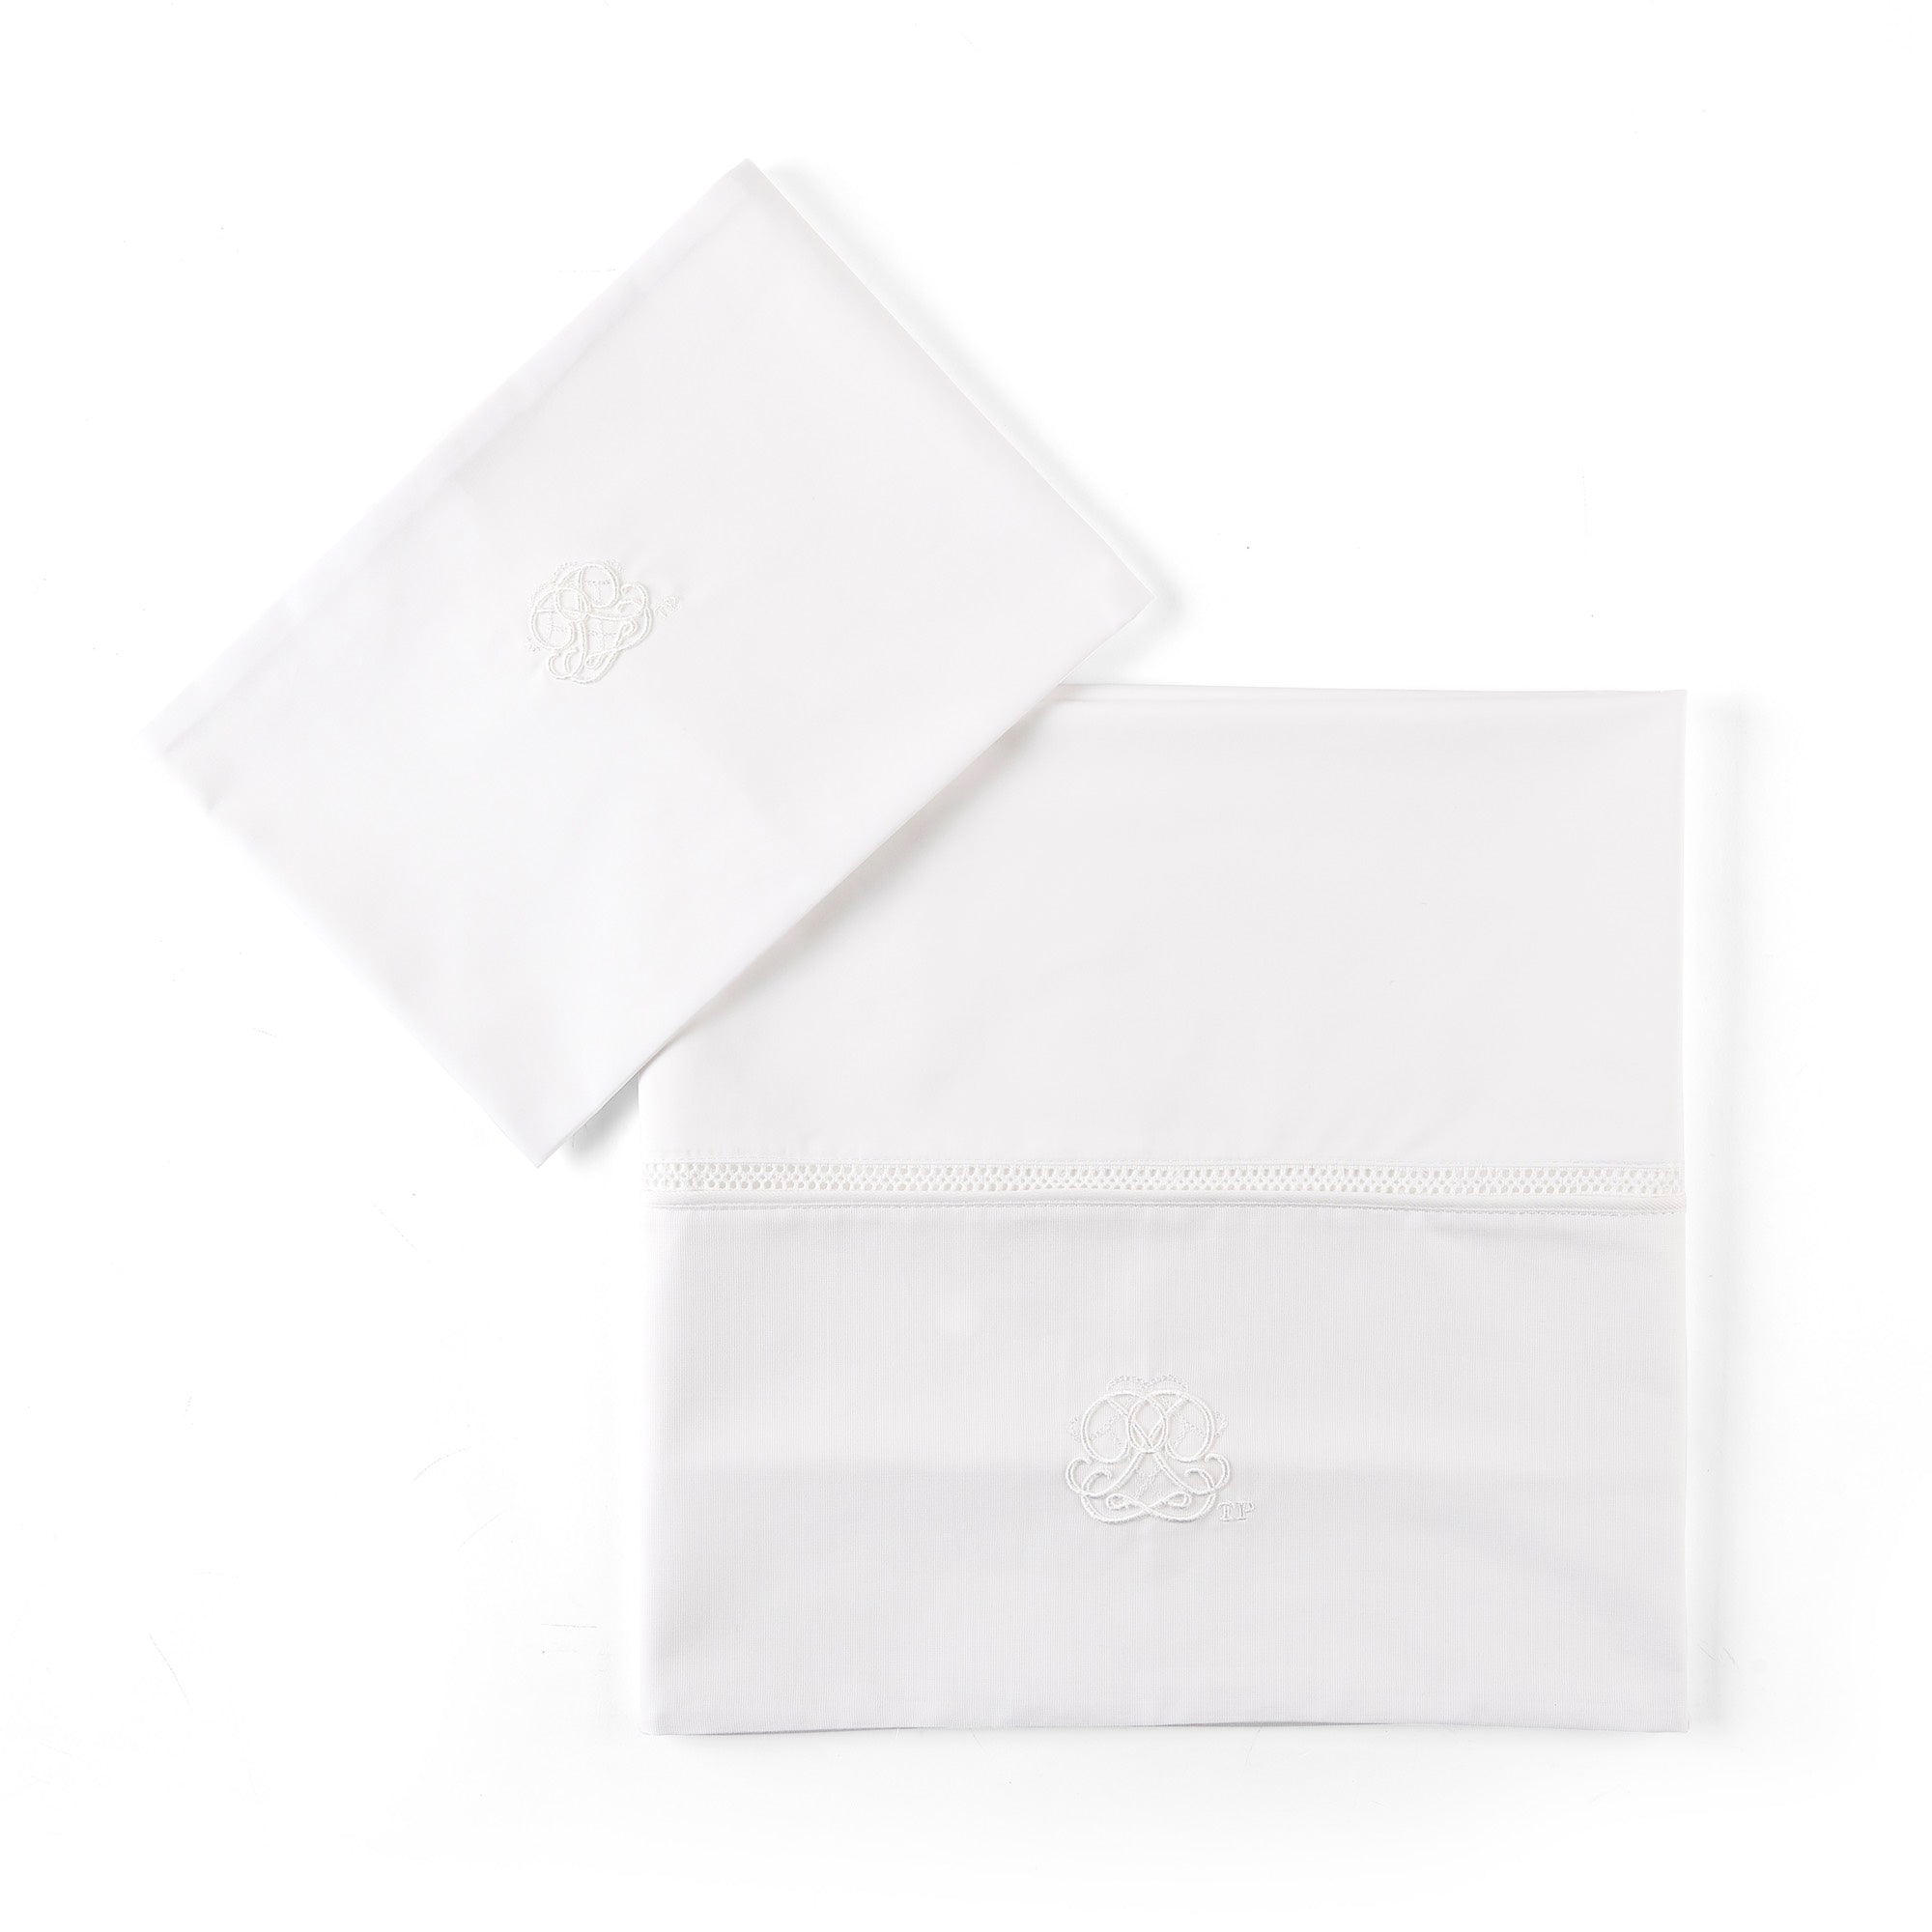 Theophile & Patachou Bed Sheet and Pillowcase - Cotton White